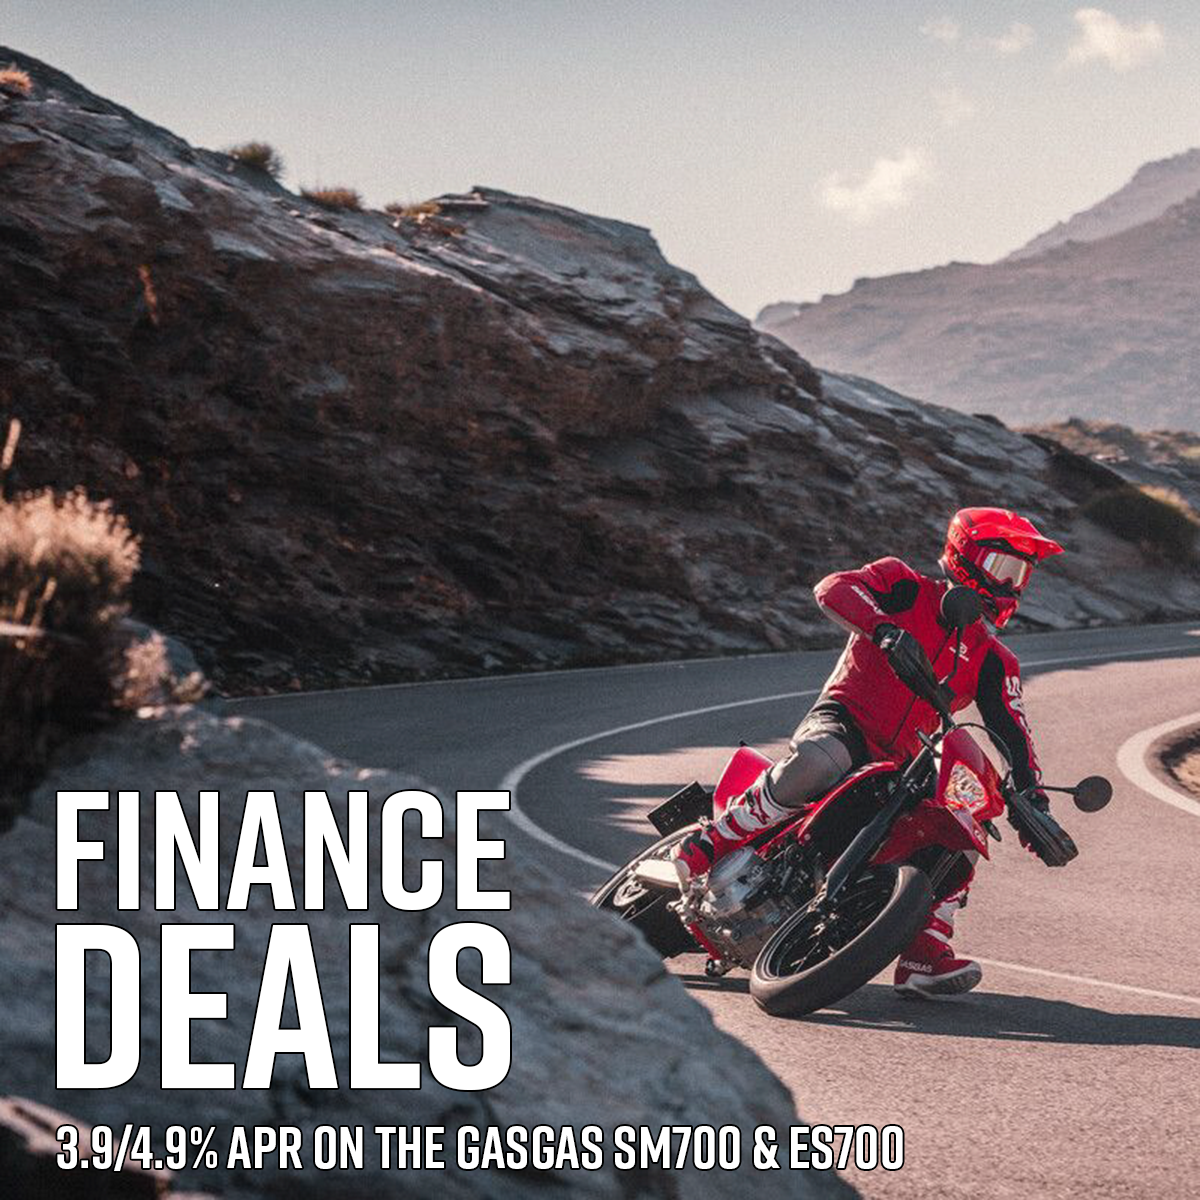 Finance deals on GASGAS SM700 and ES700 models